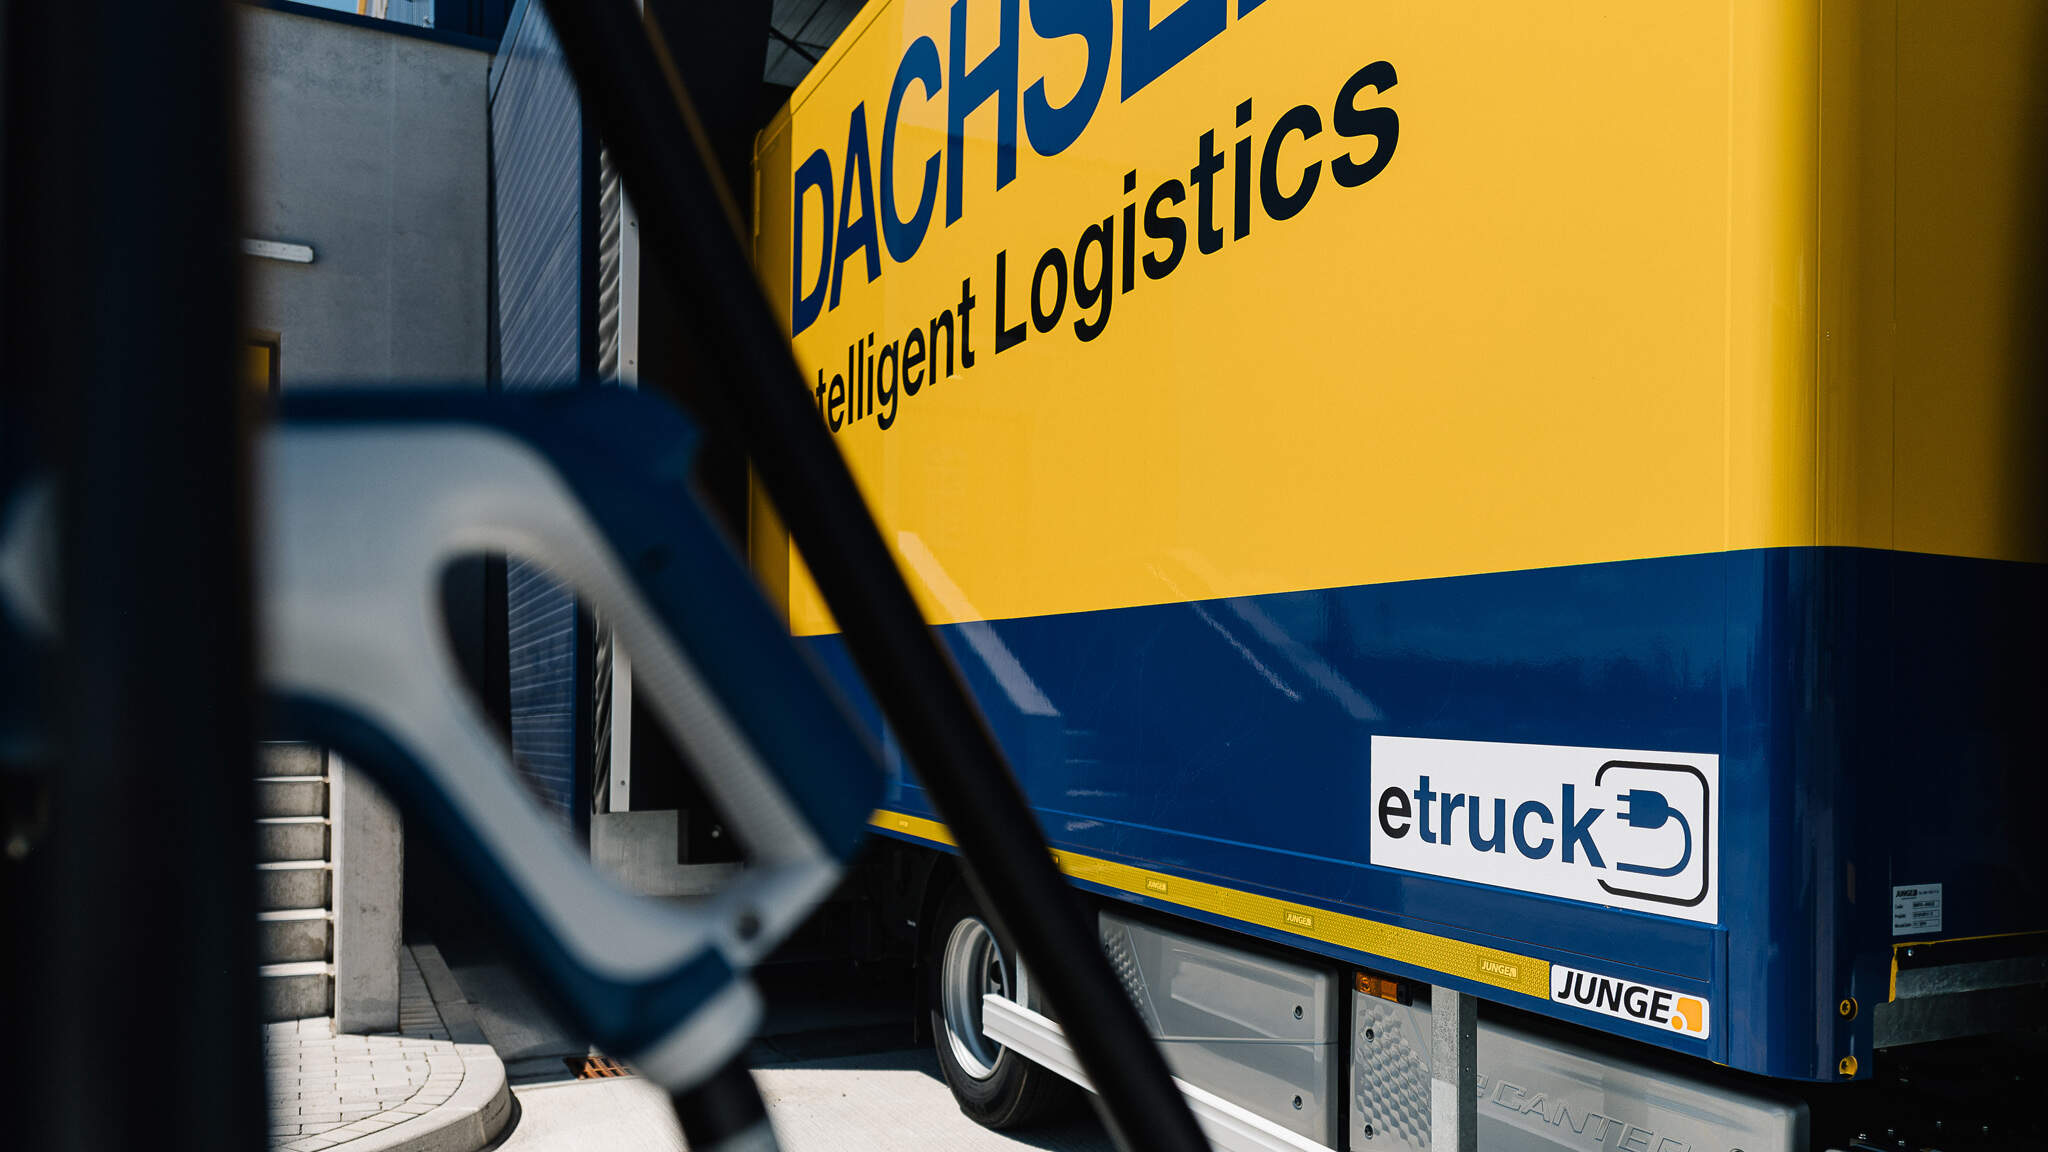 In Freiburg, DACHSER will deploy a 7.5-ton all-electric FUSO eCanter.